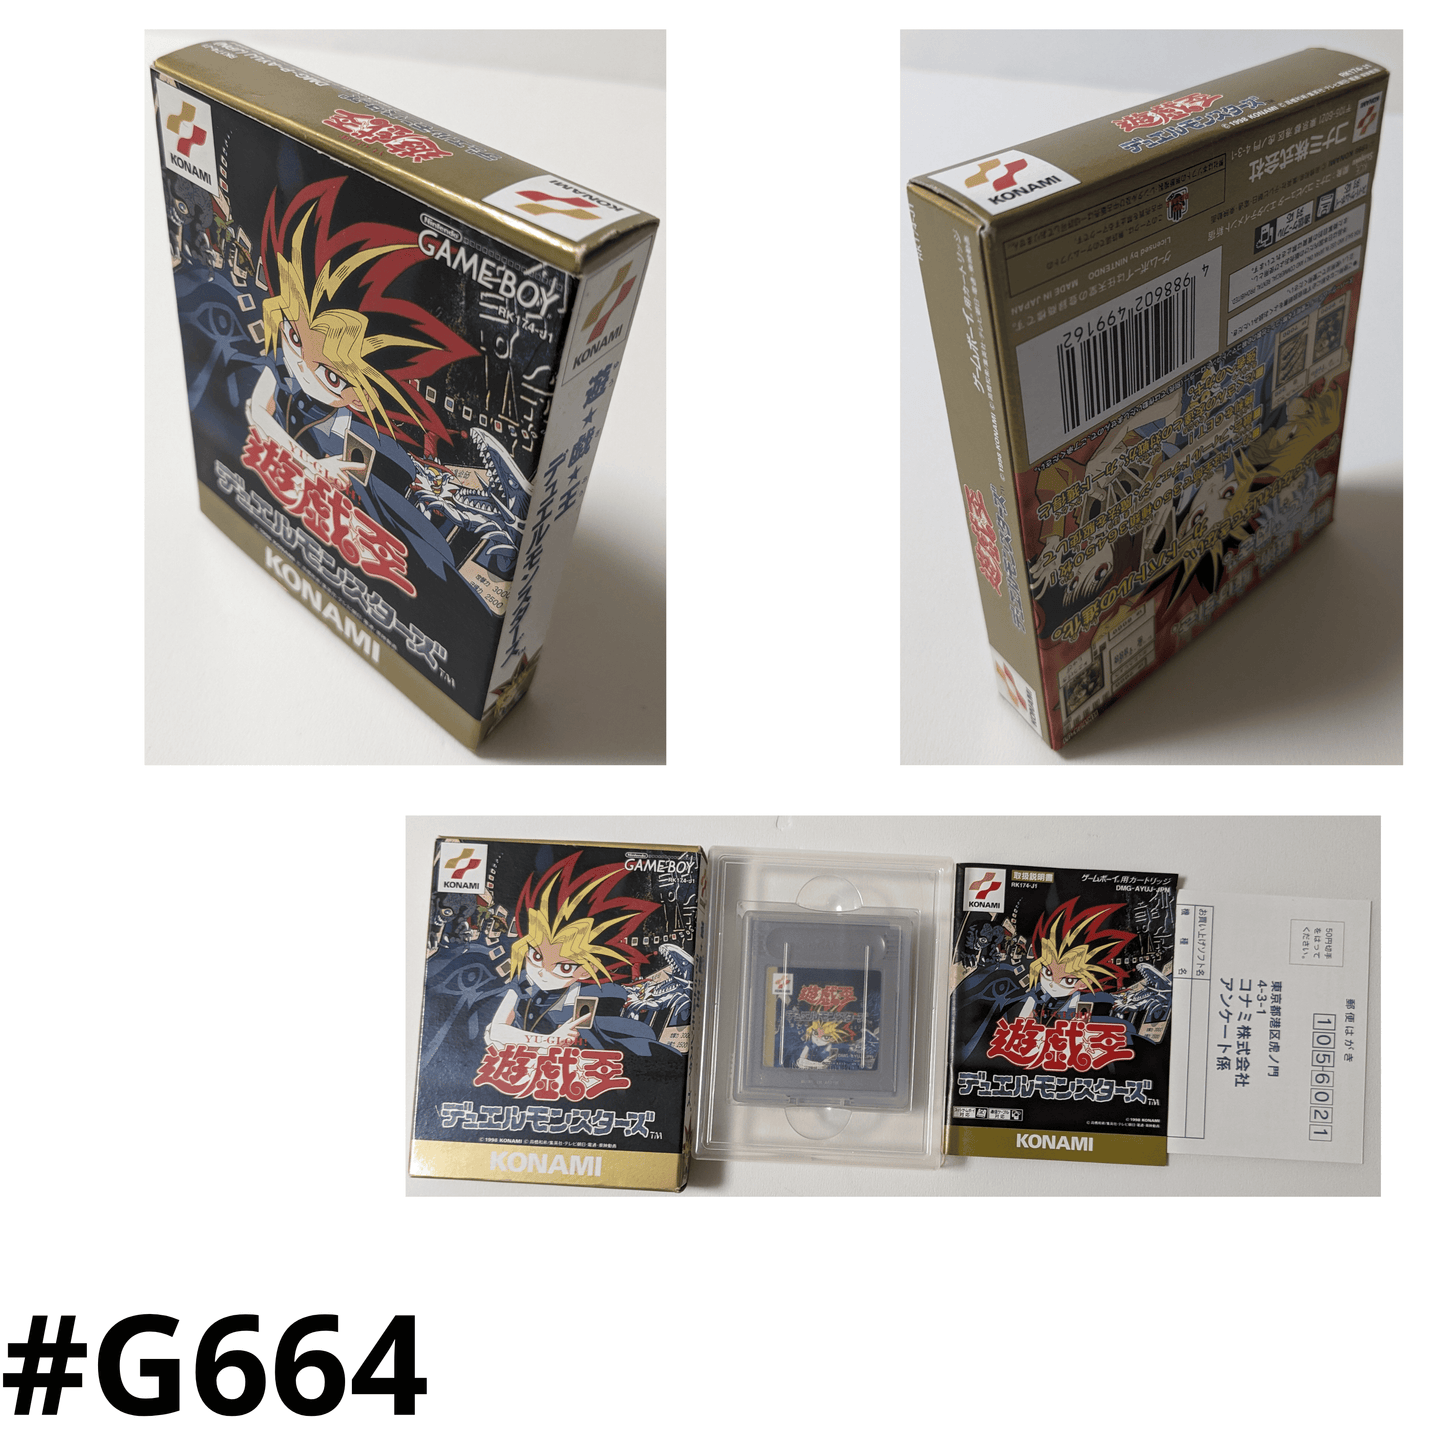 Yu Gi Oh! Dueling Monsters | gameboy